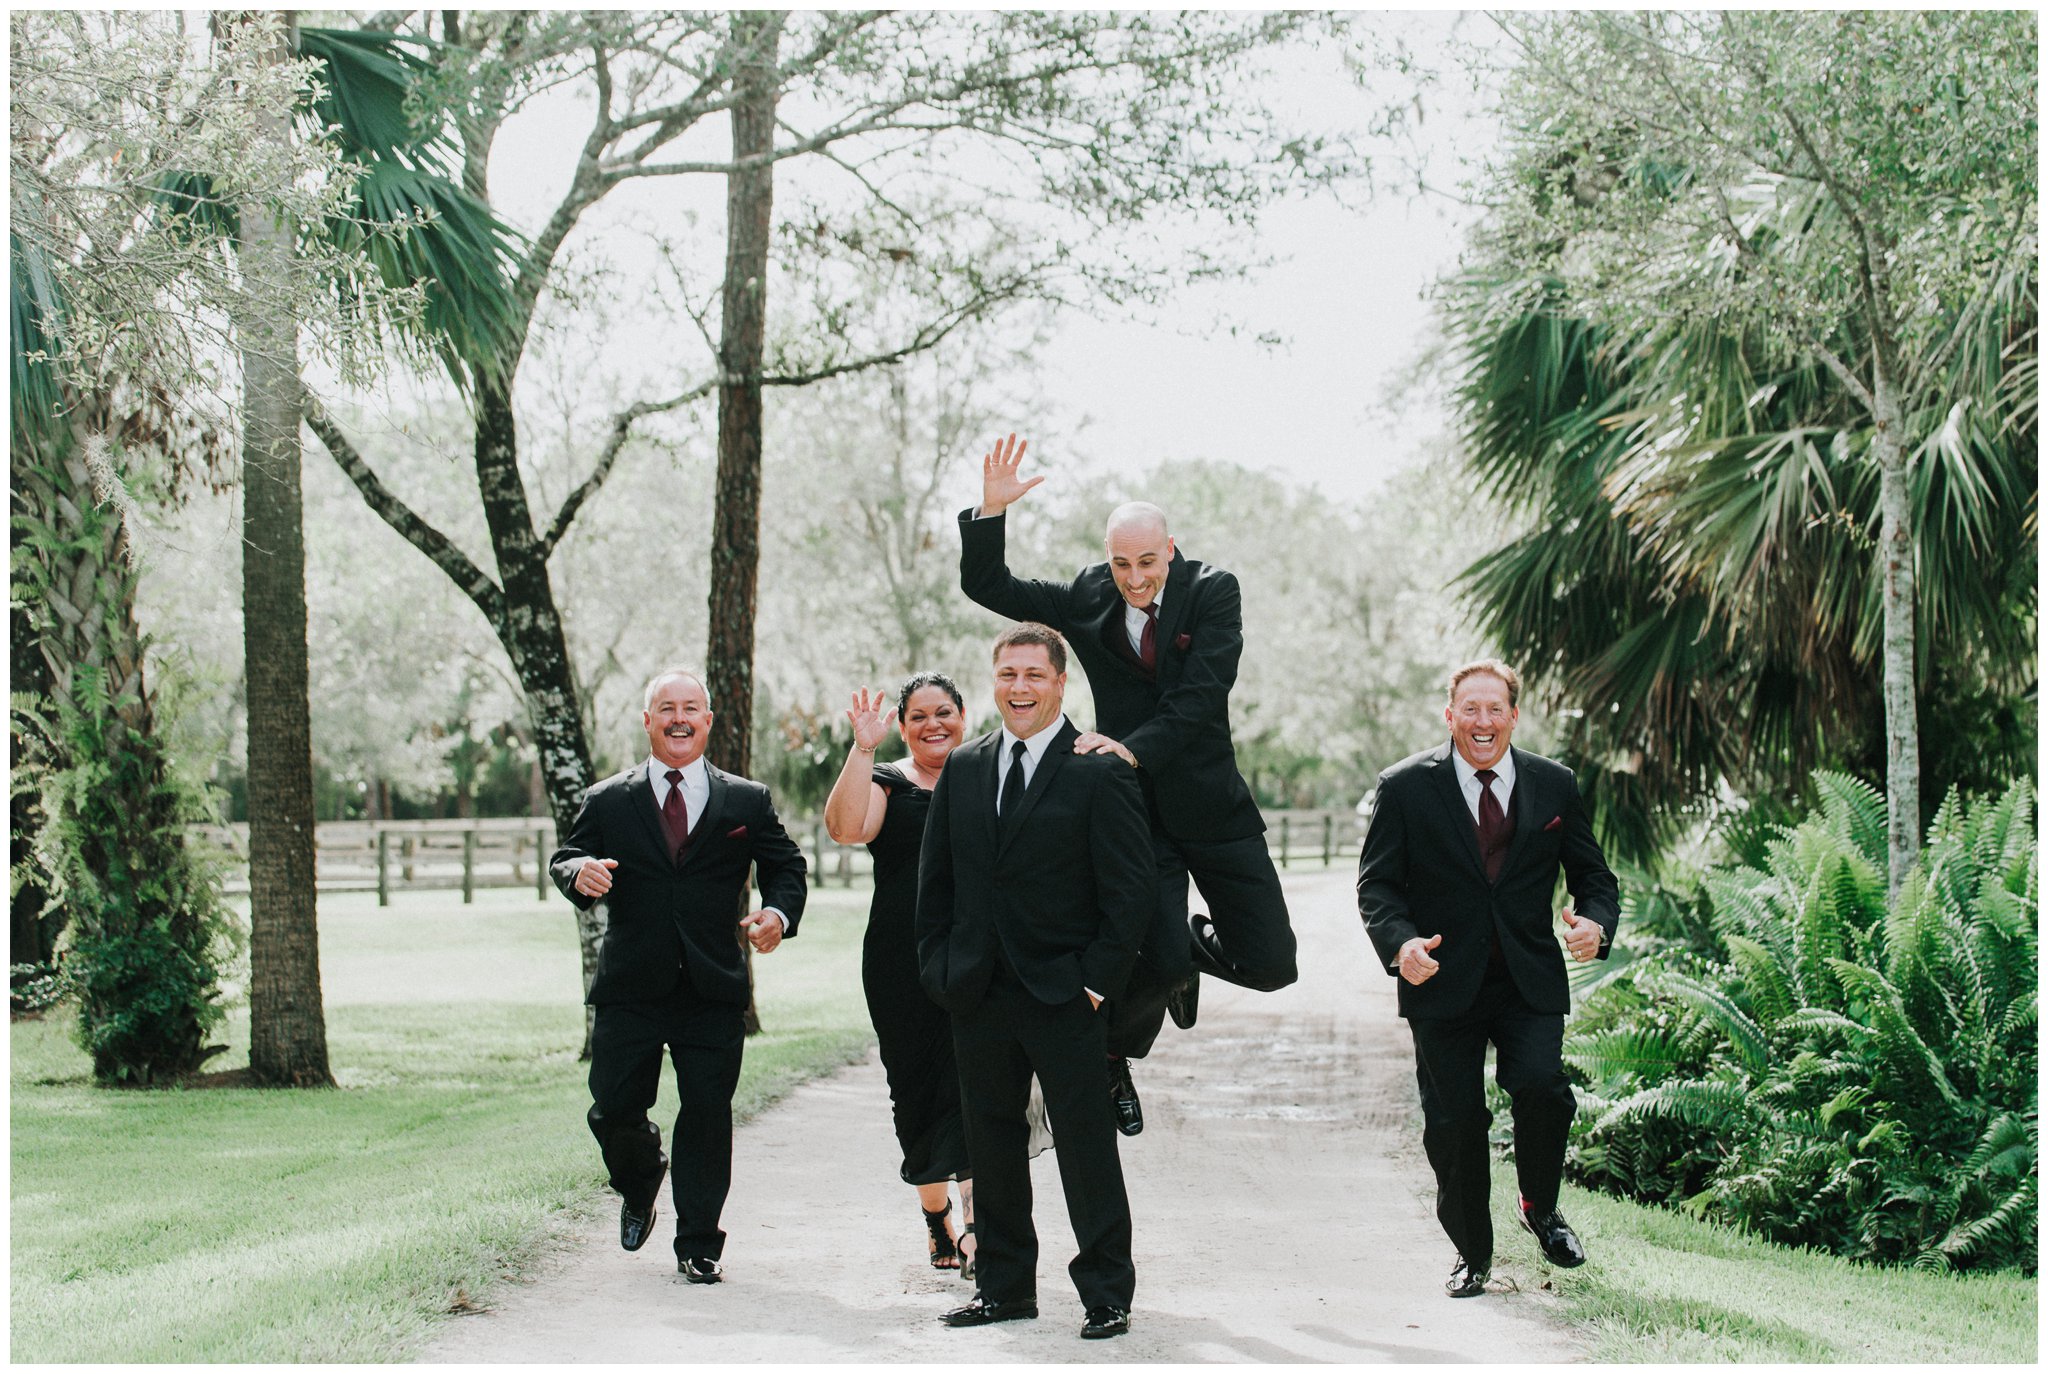 Leave it to the groom's party to have a photo like this! Don't you just love how much fun they are having?